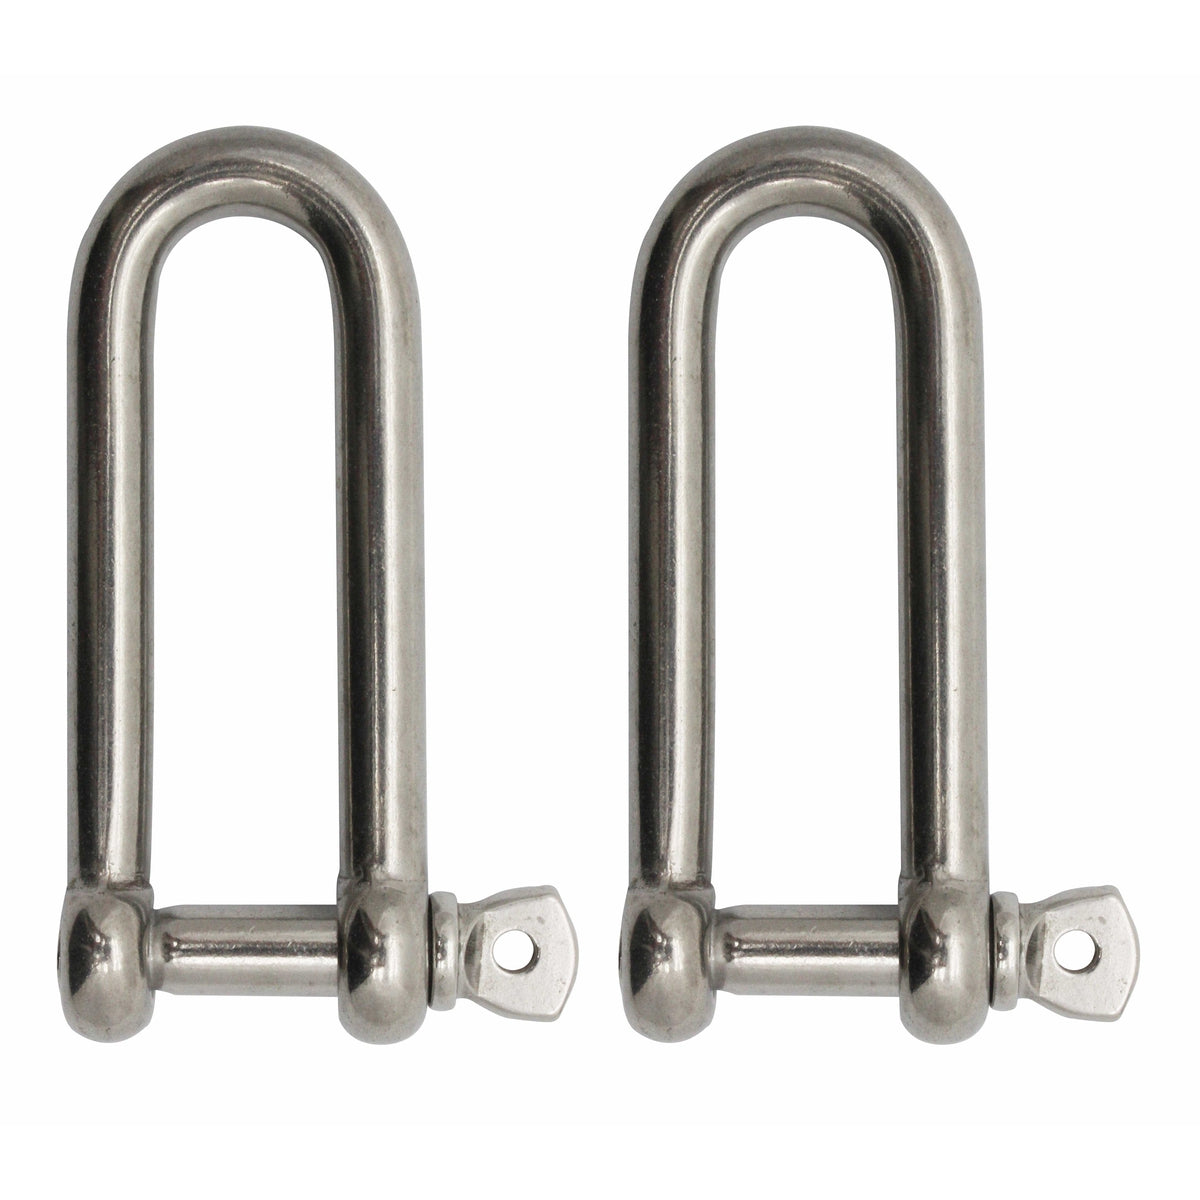 Extreme Max BoatTector SS Long D Shackle 1/2" 2-pk #3006.8209.2